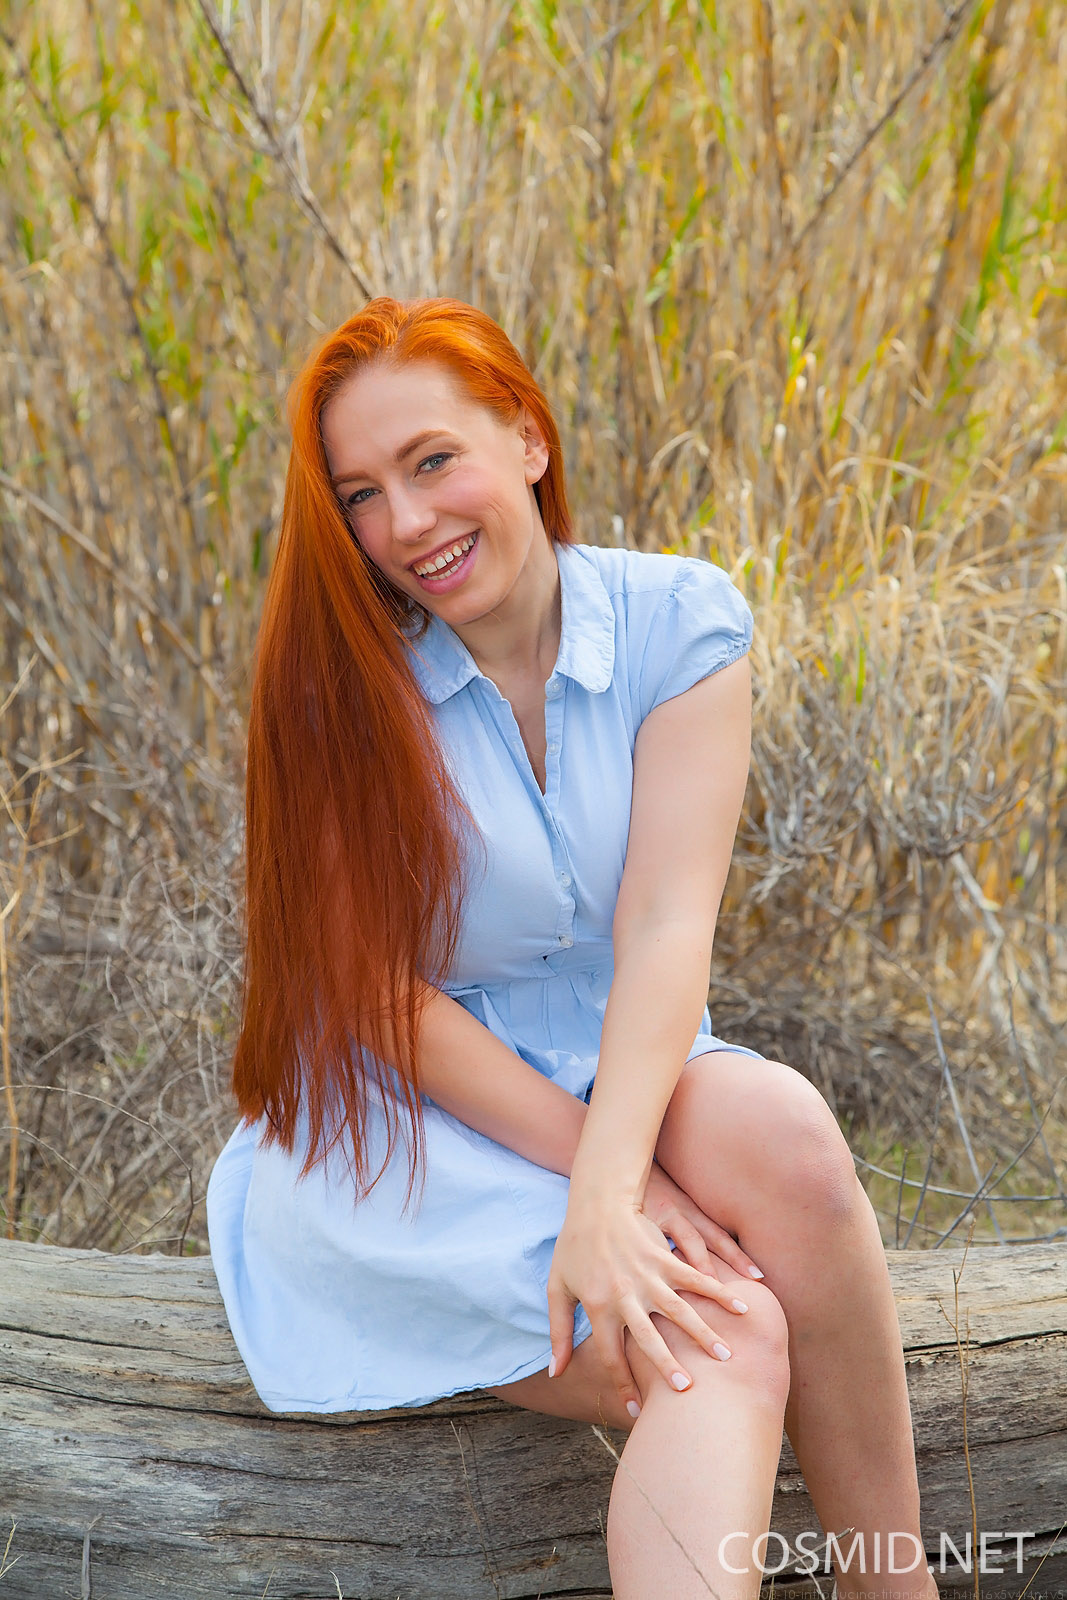 Titania Vibrant Redhead In Nature for Cosmid